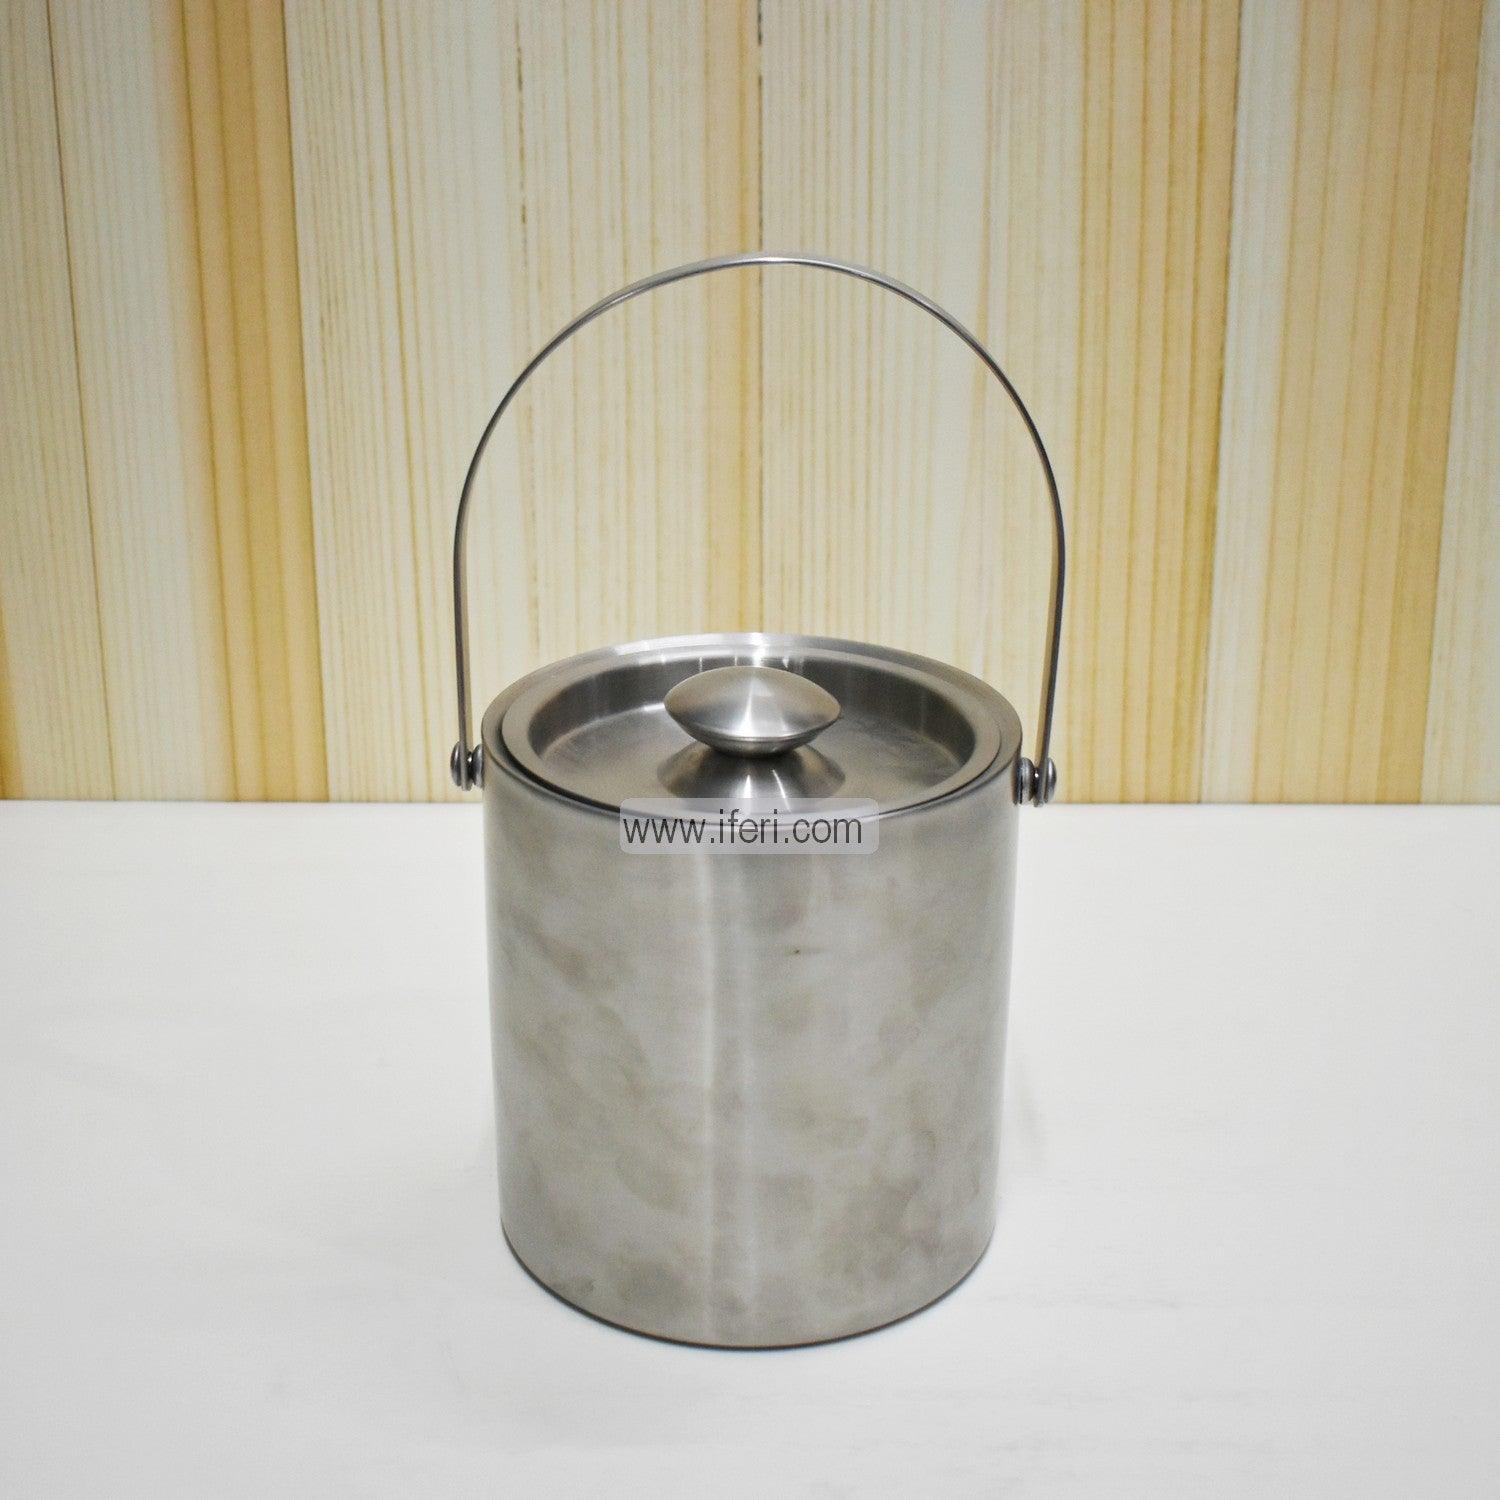 Stainless Steel Ice Bucket With Tong Price in Bangladesh - iferi.com